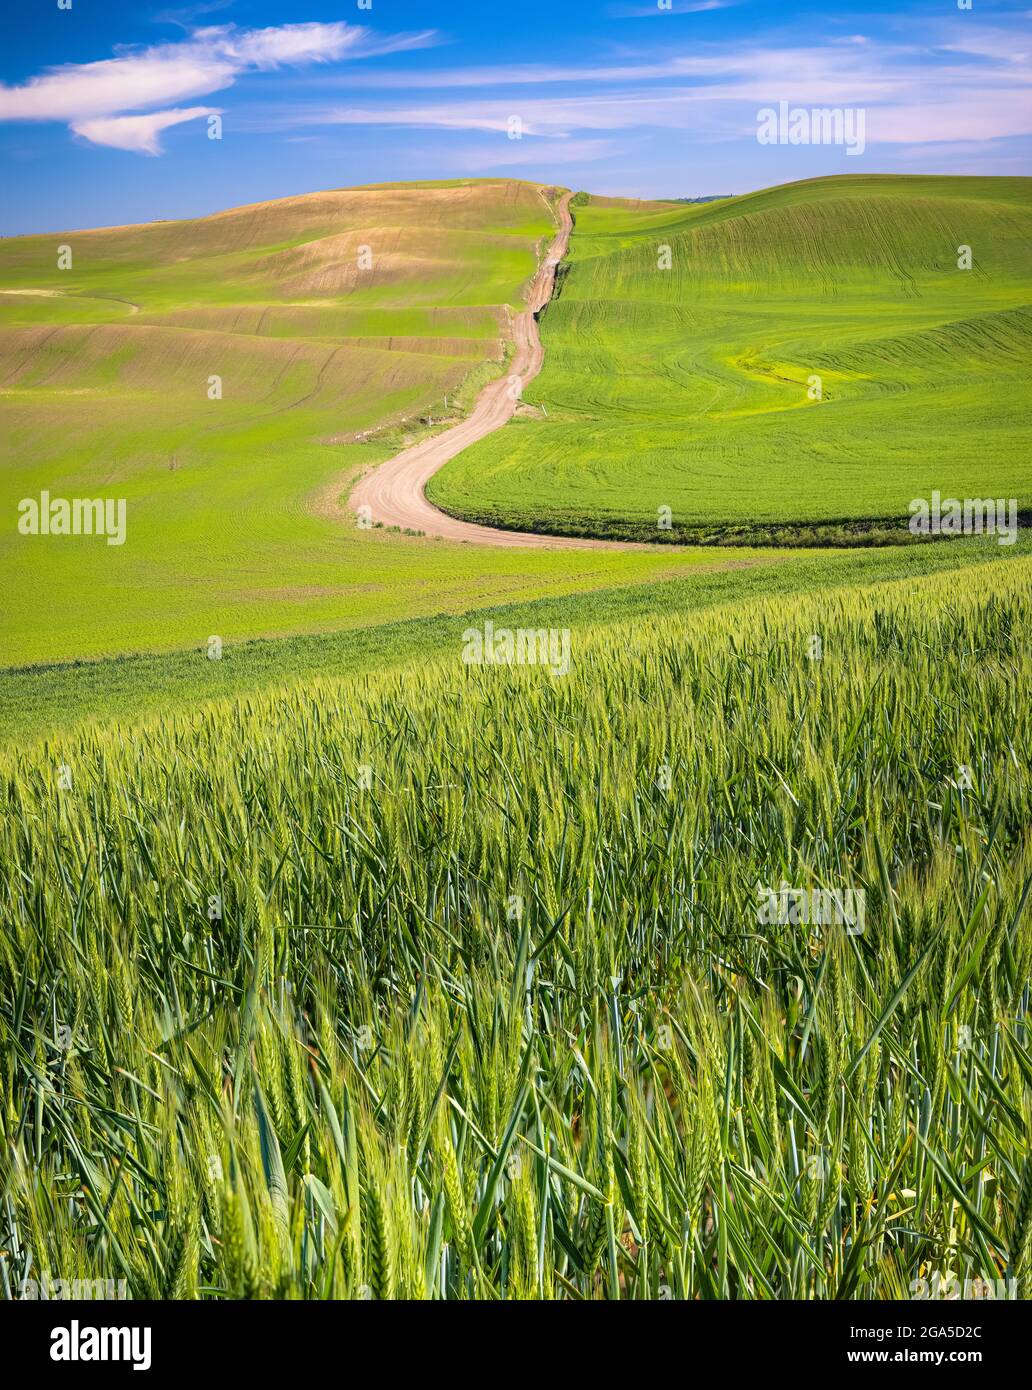 Country road near the town of Garfield in the Palouse area of Washington state. Stock Photo